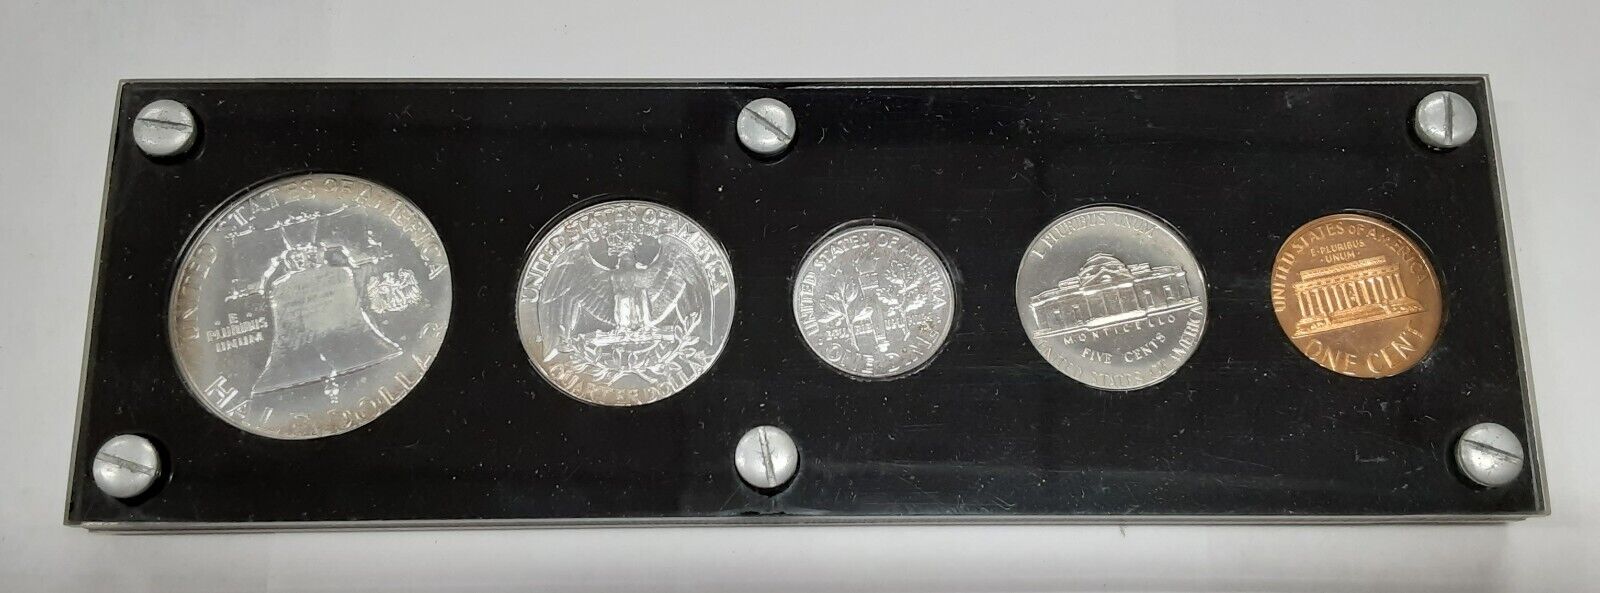 1960 Proof Year Set 5 Silver Coins w/Half, Quarter, & Dime in Black Holder (A)